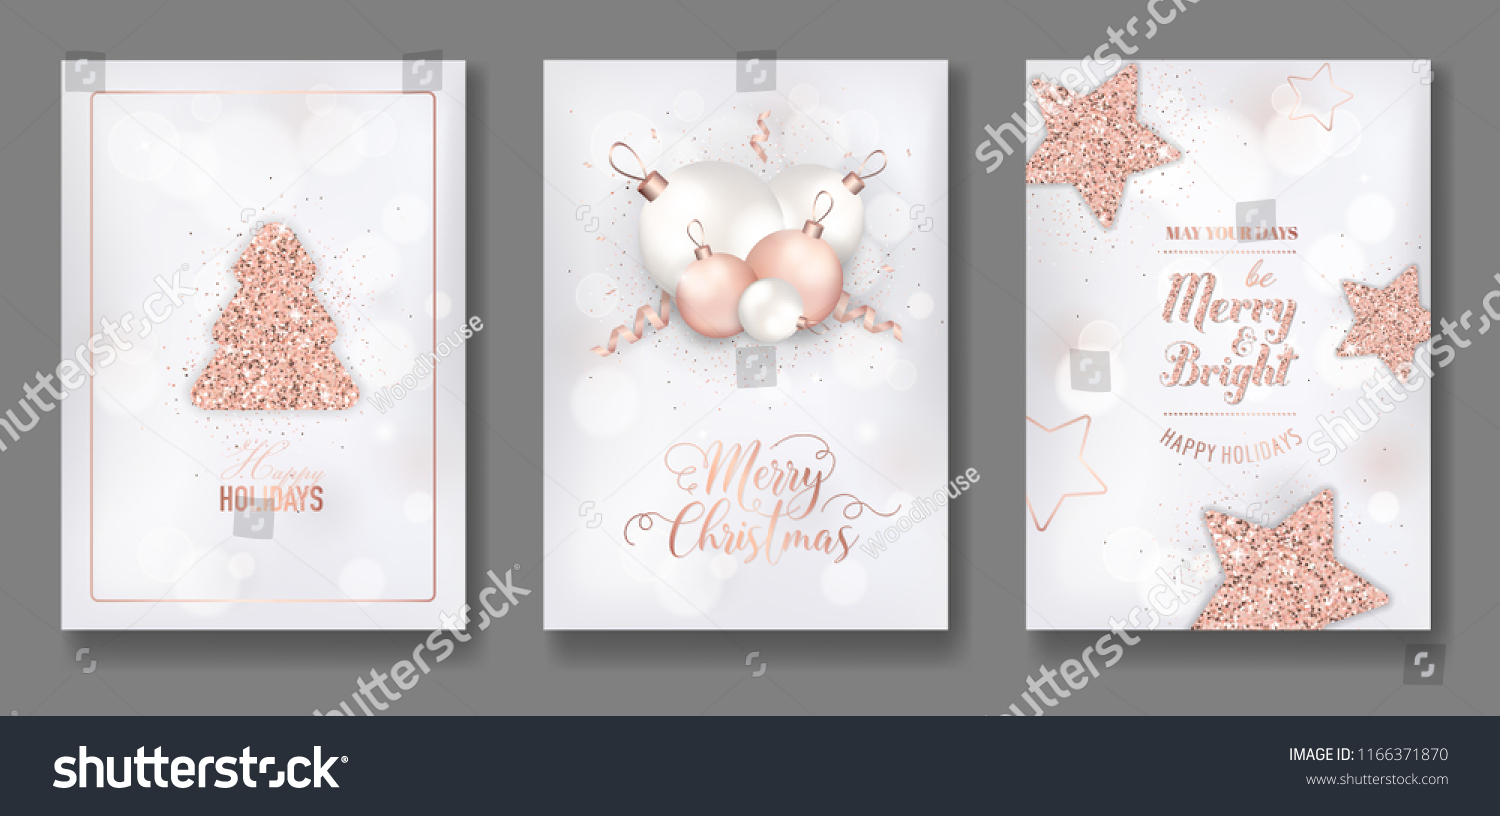 SVG of vector collection of elegant merry christmas cards with shining rose gold glitter xmas balls star christmas tree flyer and new year brochure 2019 svg